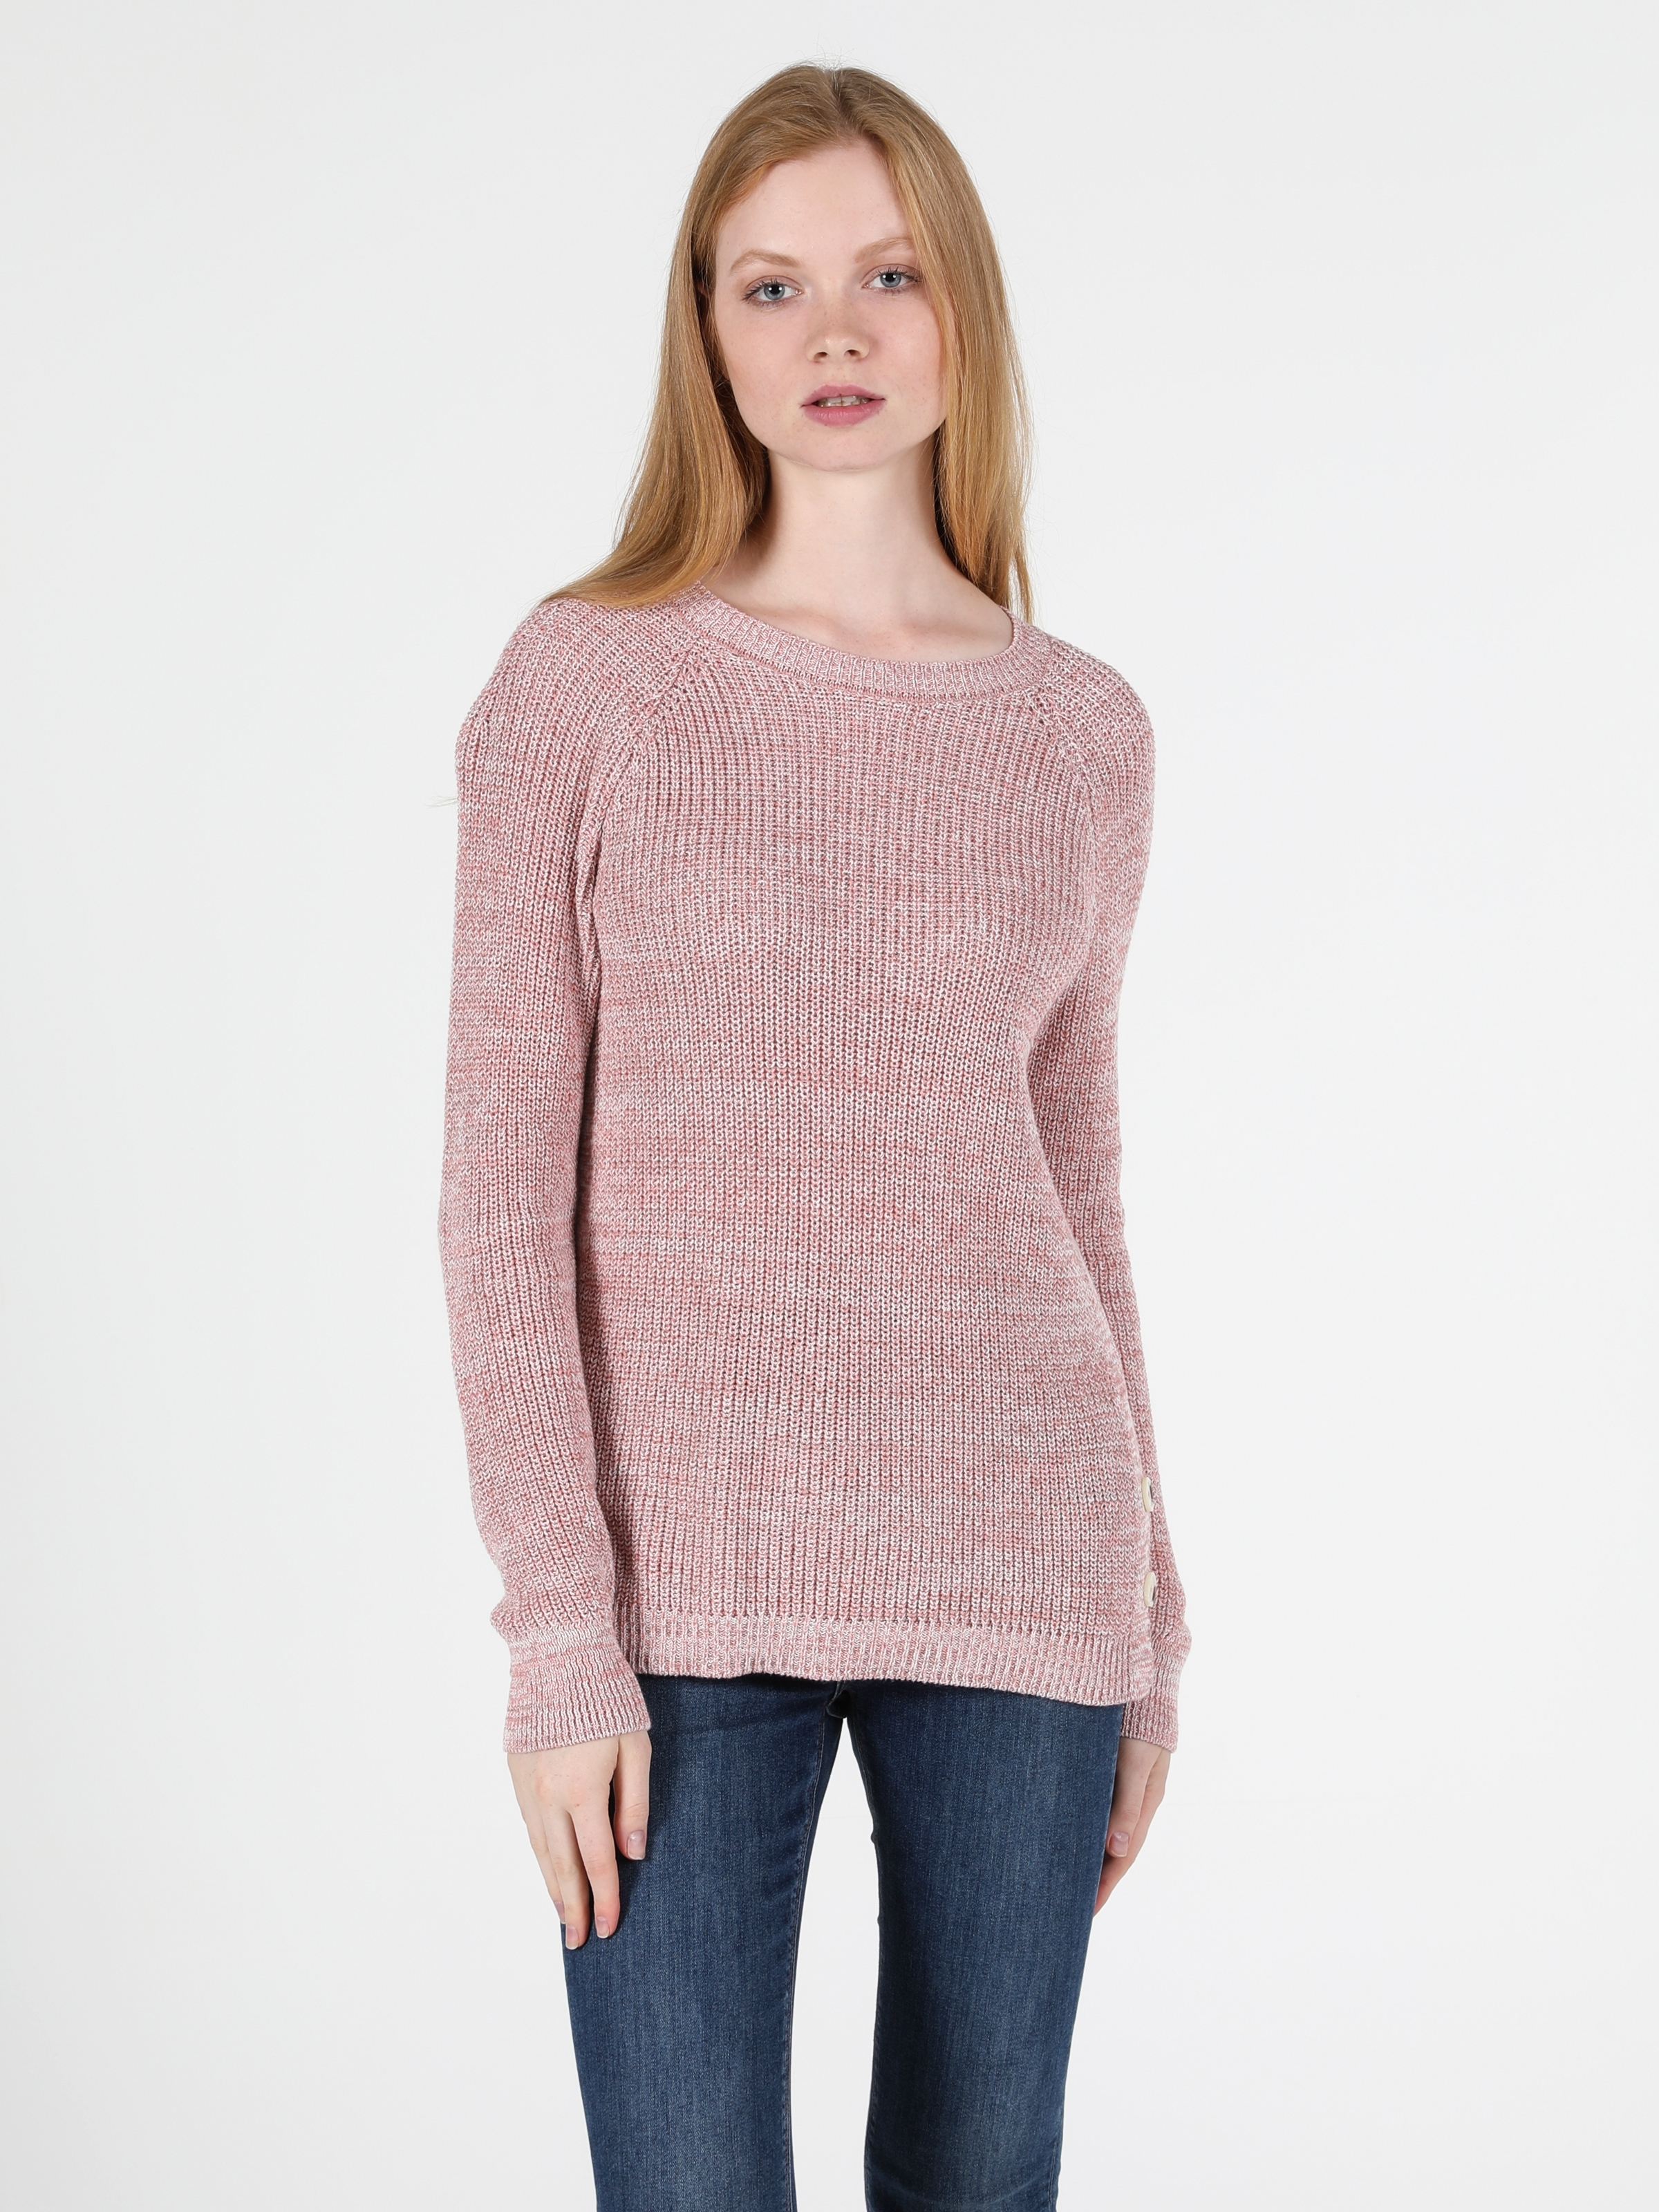 Colins Pınk Woman Sweaters. 4